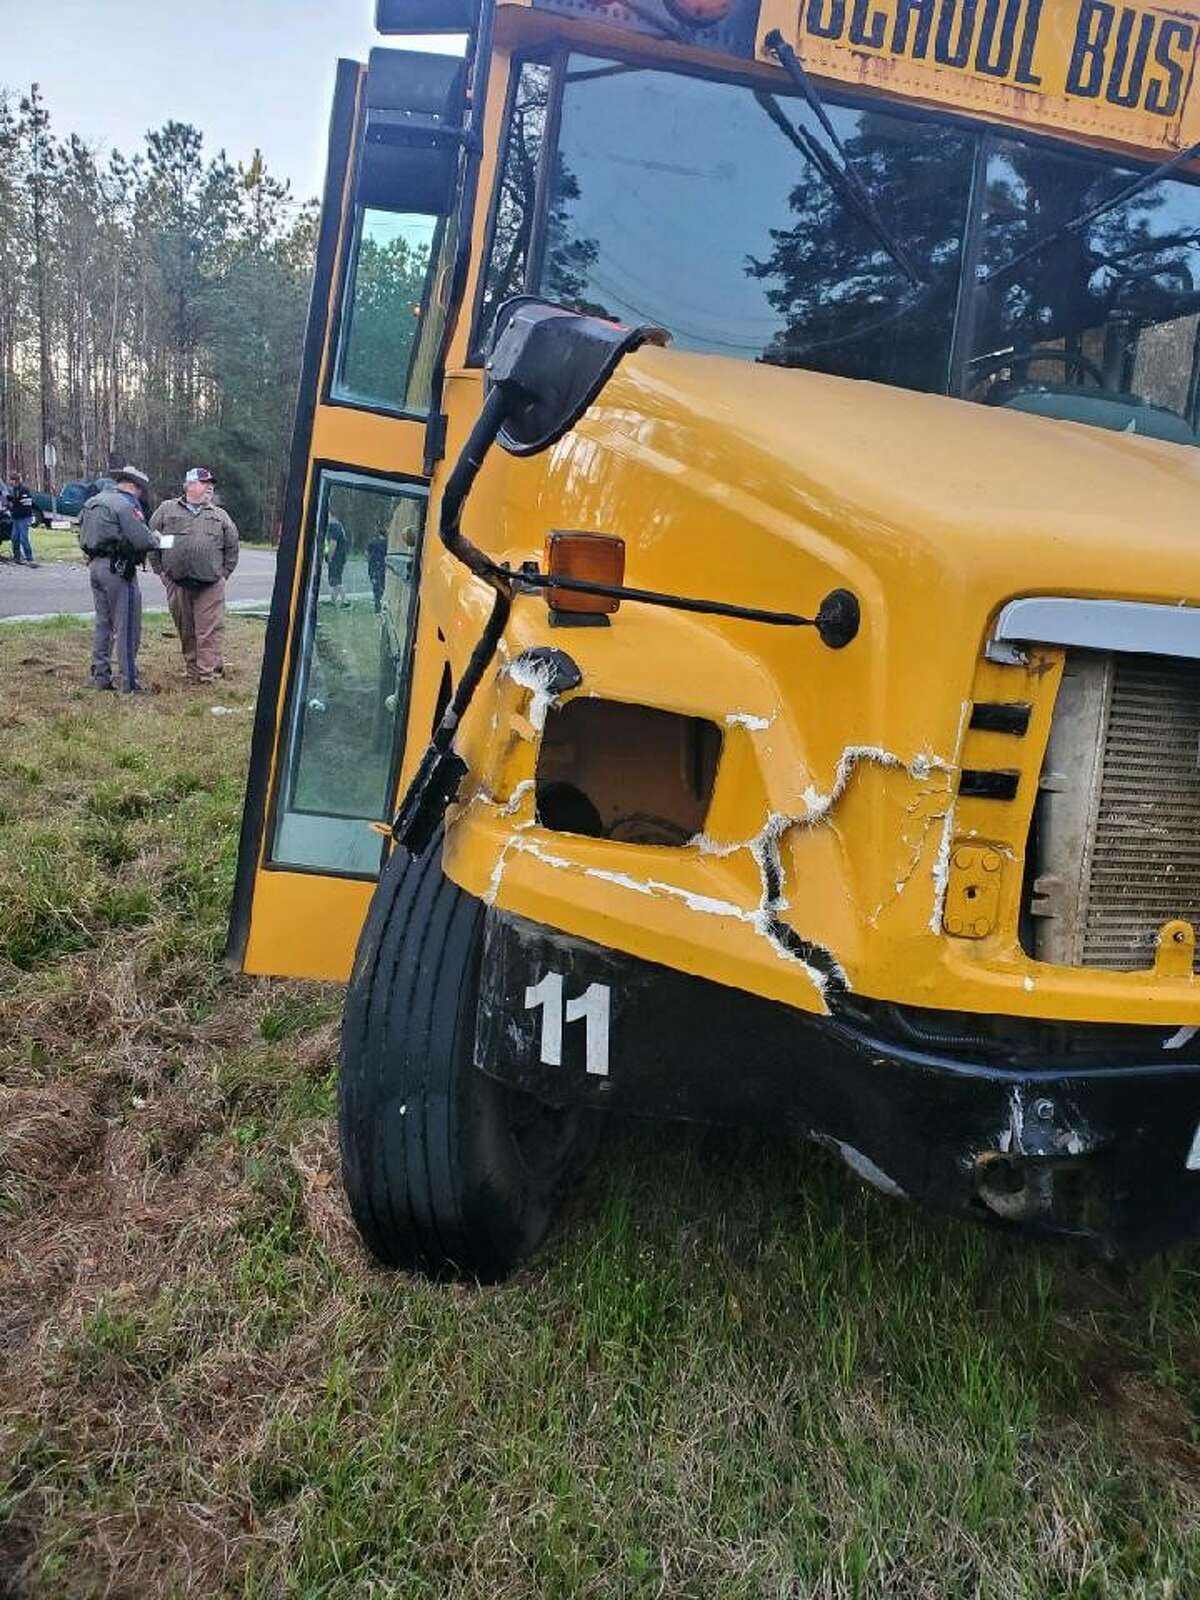 A Spurger ISD school bus was involved in an early morning accident on Wednesday morning when a suspect being pursued by Tyler County deputies ran a stop sign and collided with the bus.